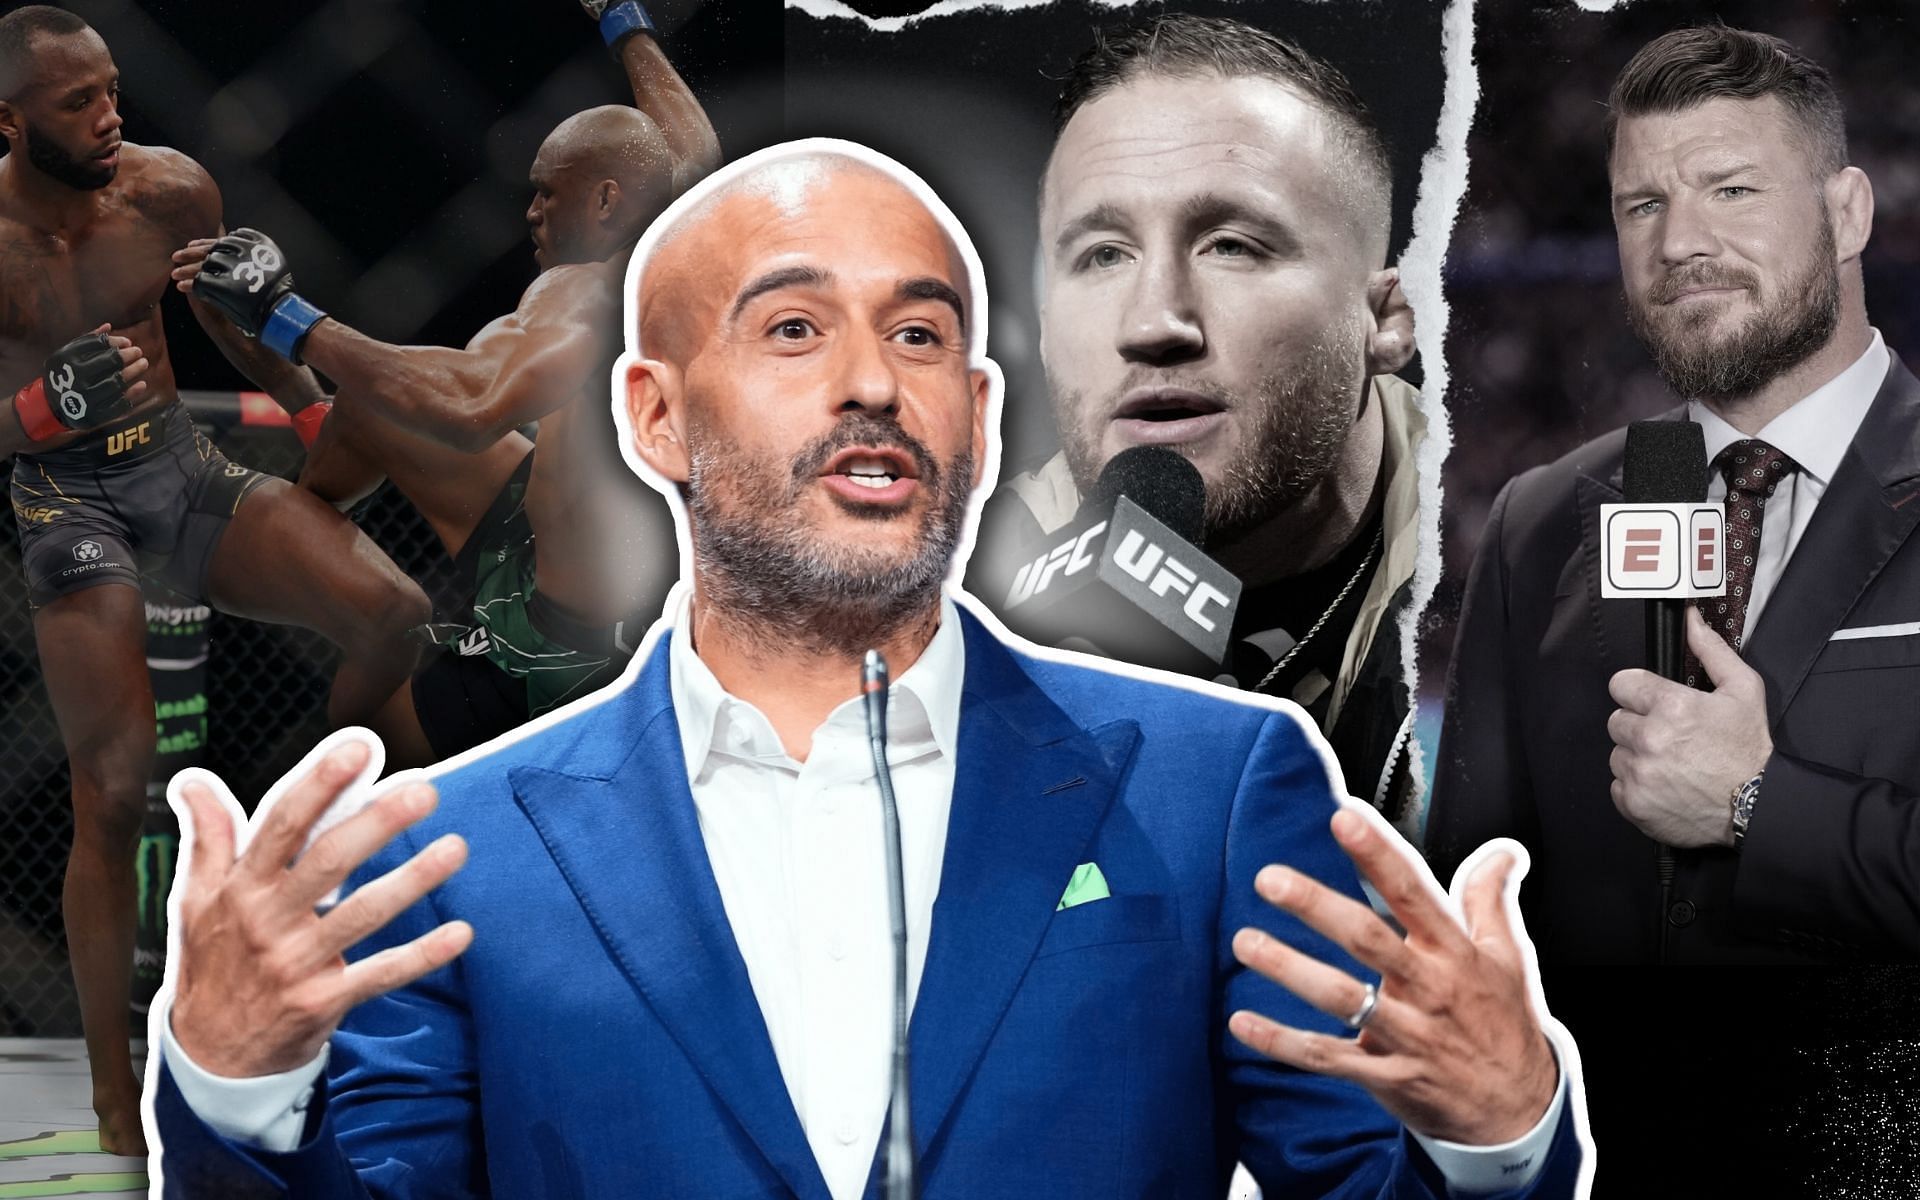 Jon Anik comes out in defense of Michael Bisping after Justin Gaethje